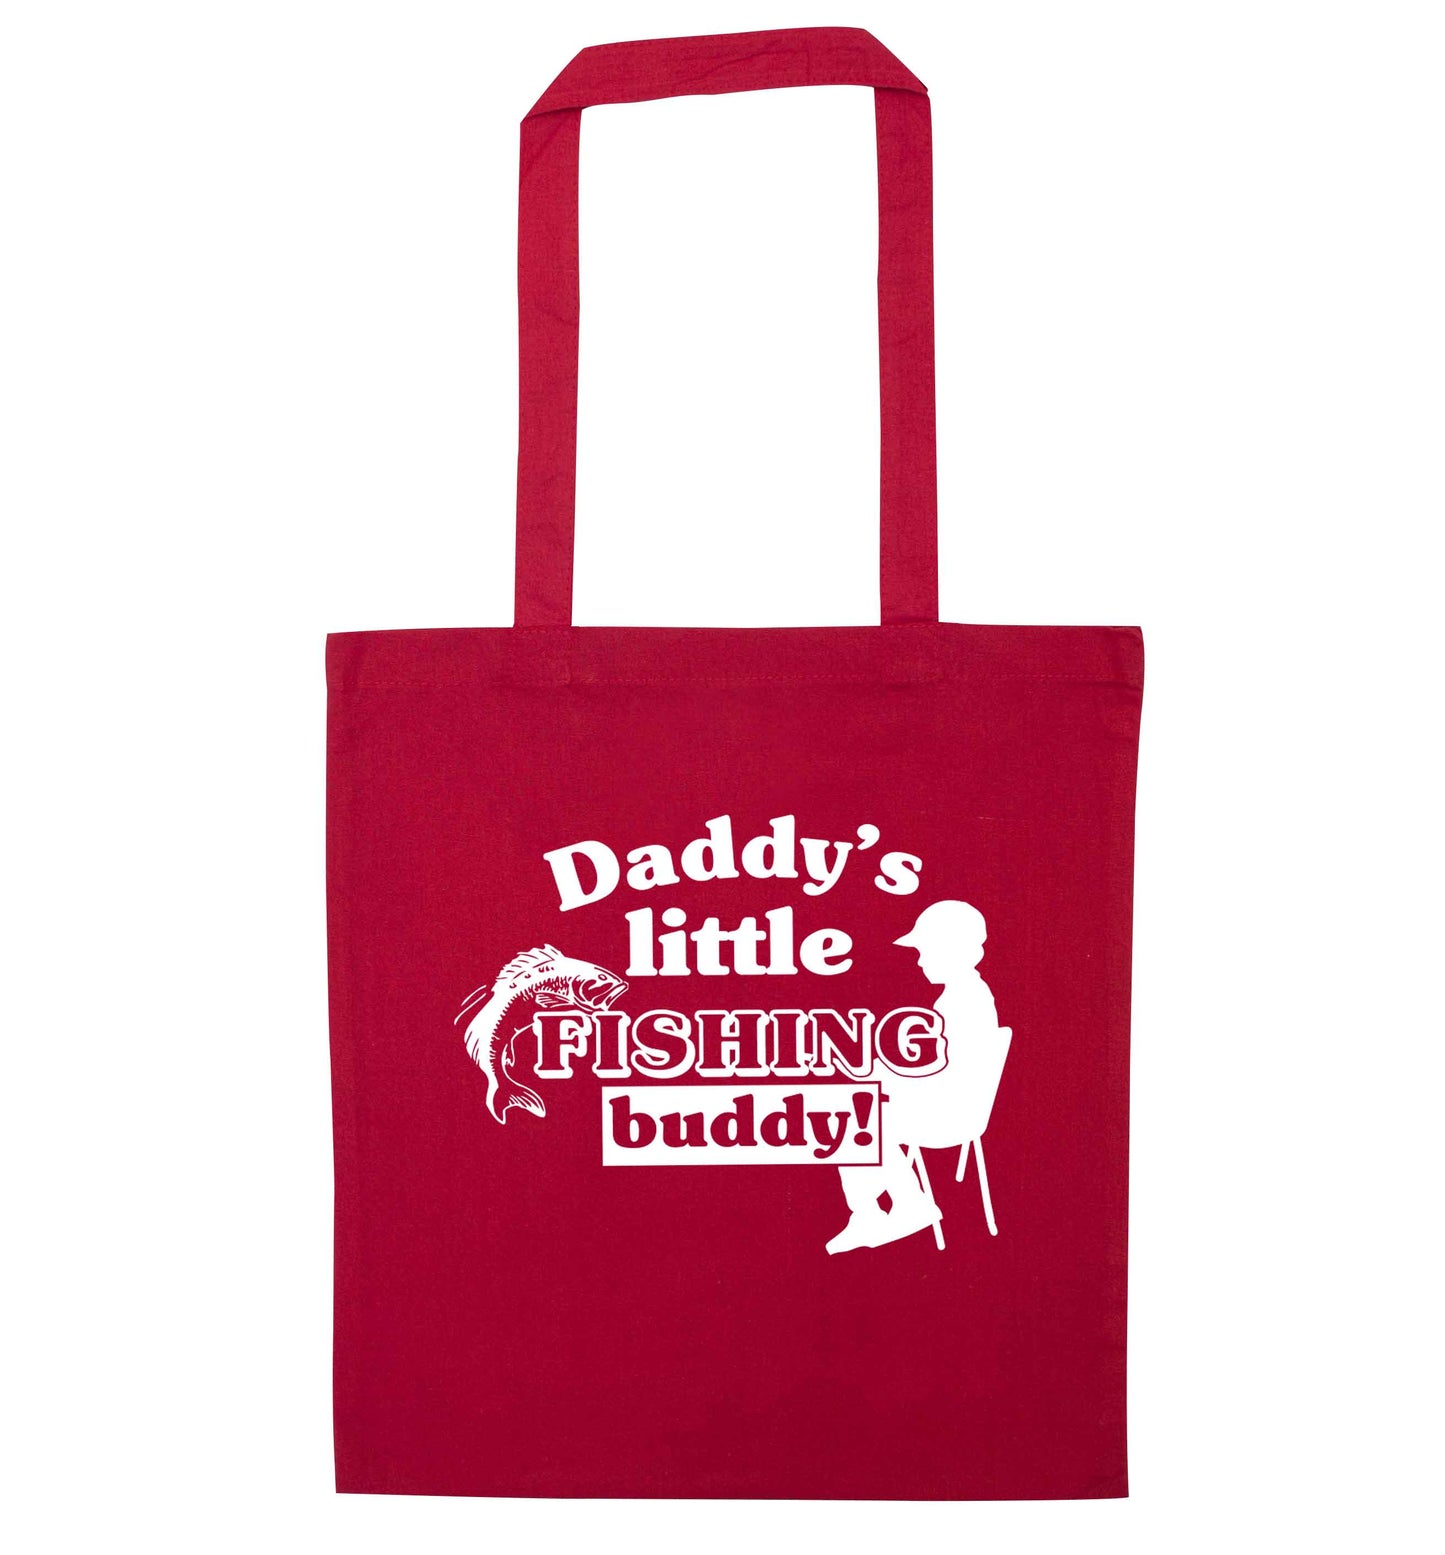 Daddy's little fishing buddy red tote bag